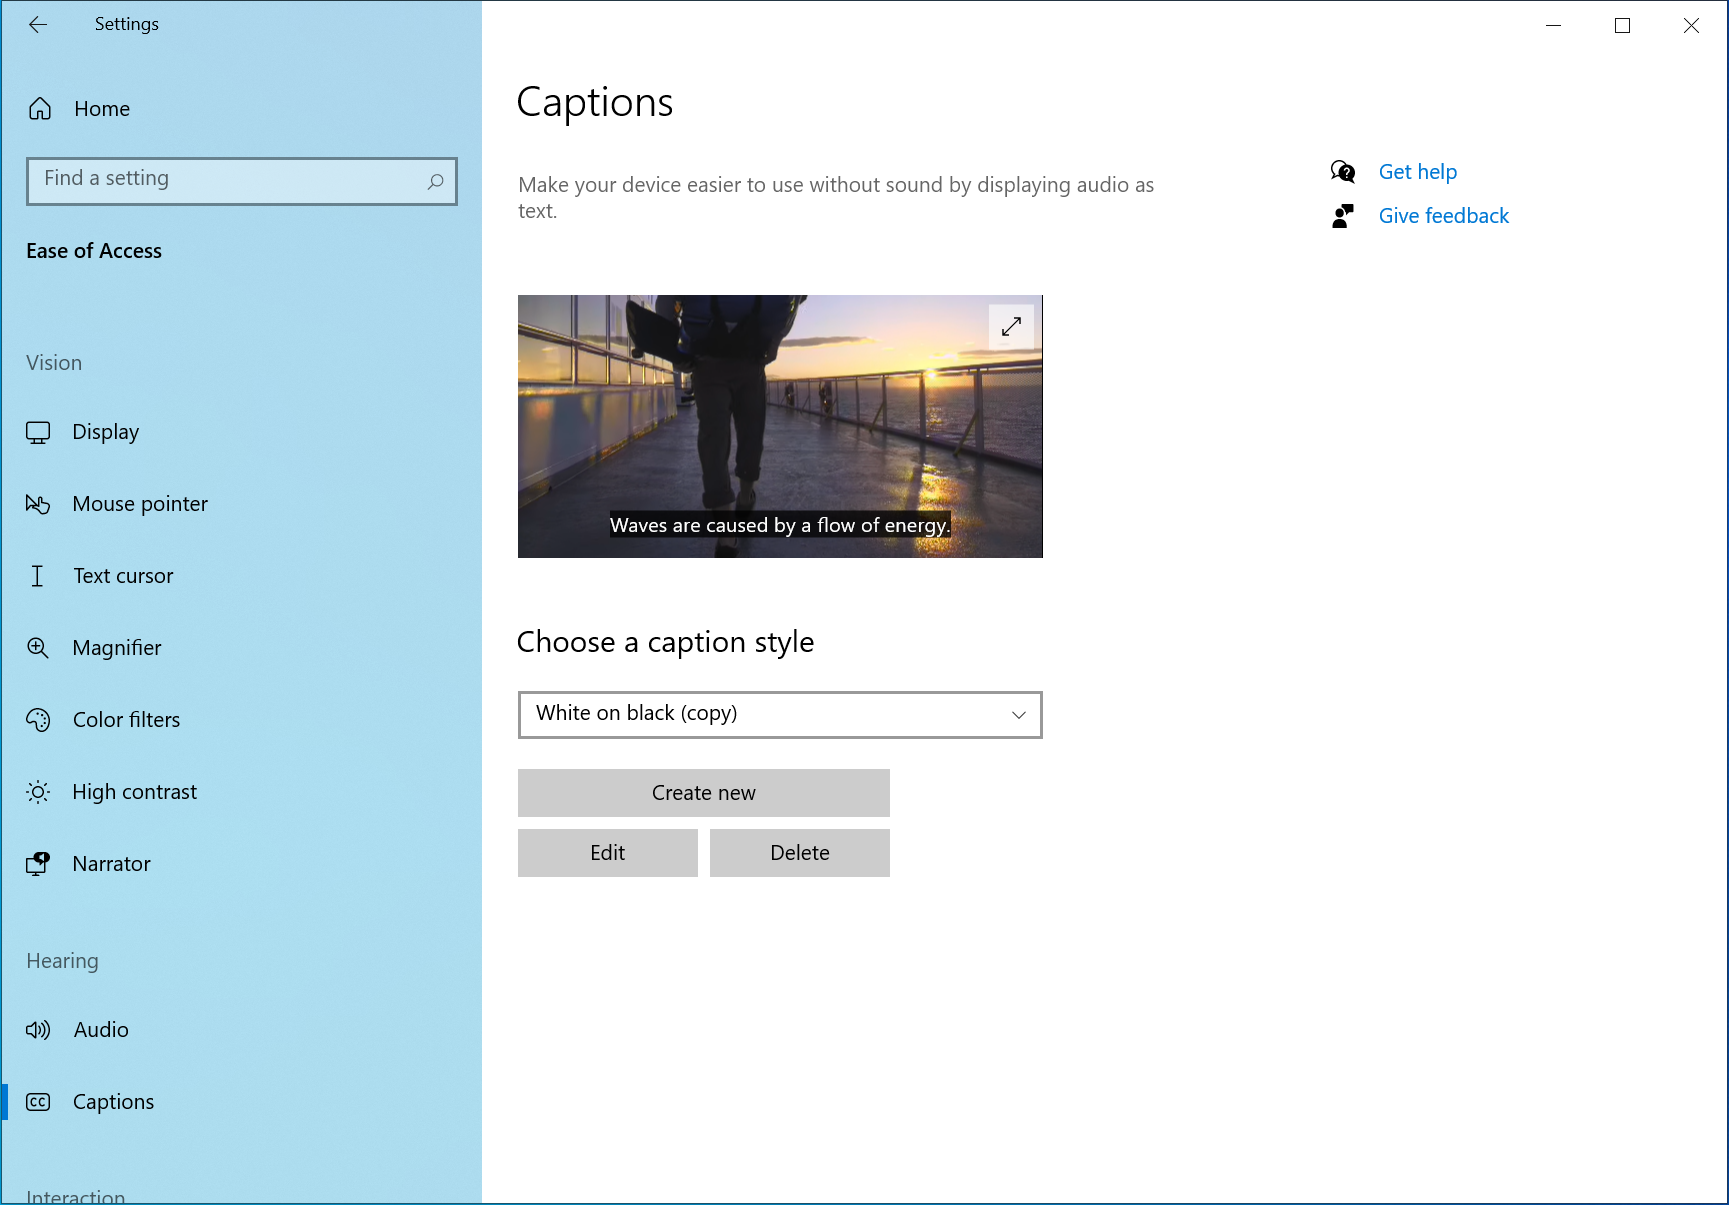 Windows 10 Insider Preview Dev Build 21337 (RS_PRERELEASE) - March 17 captions.png